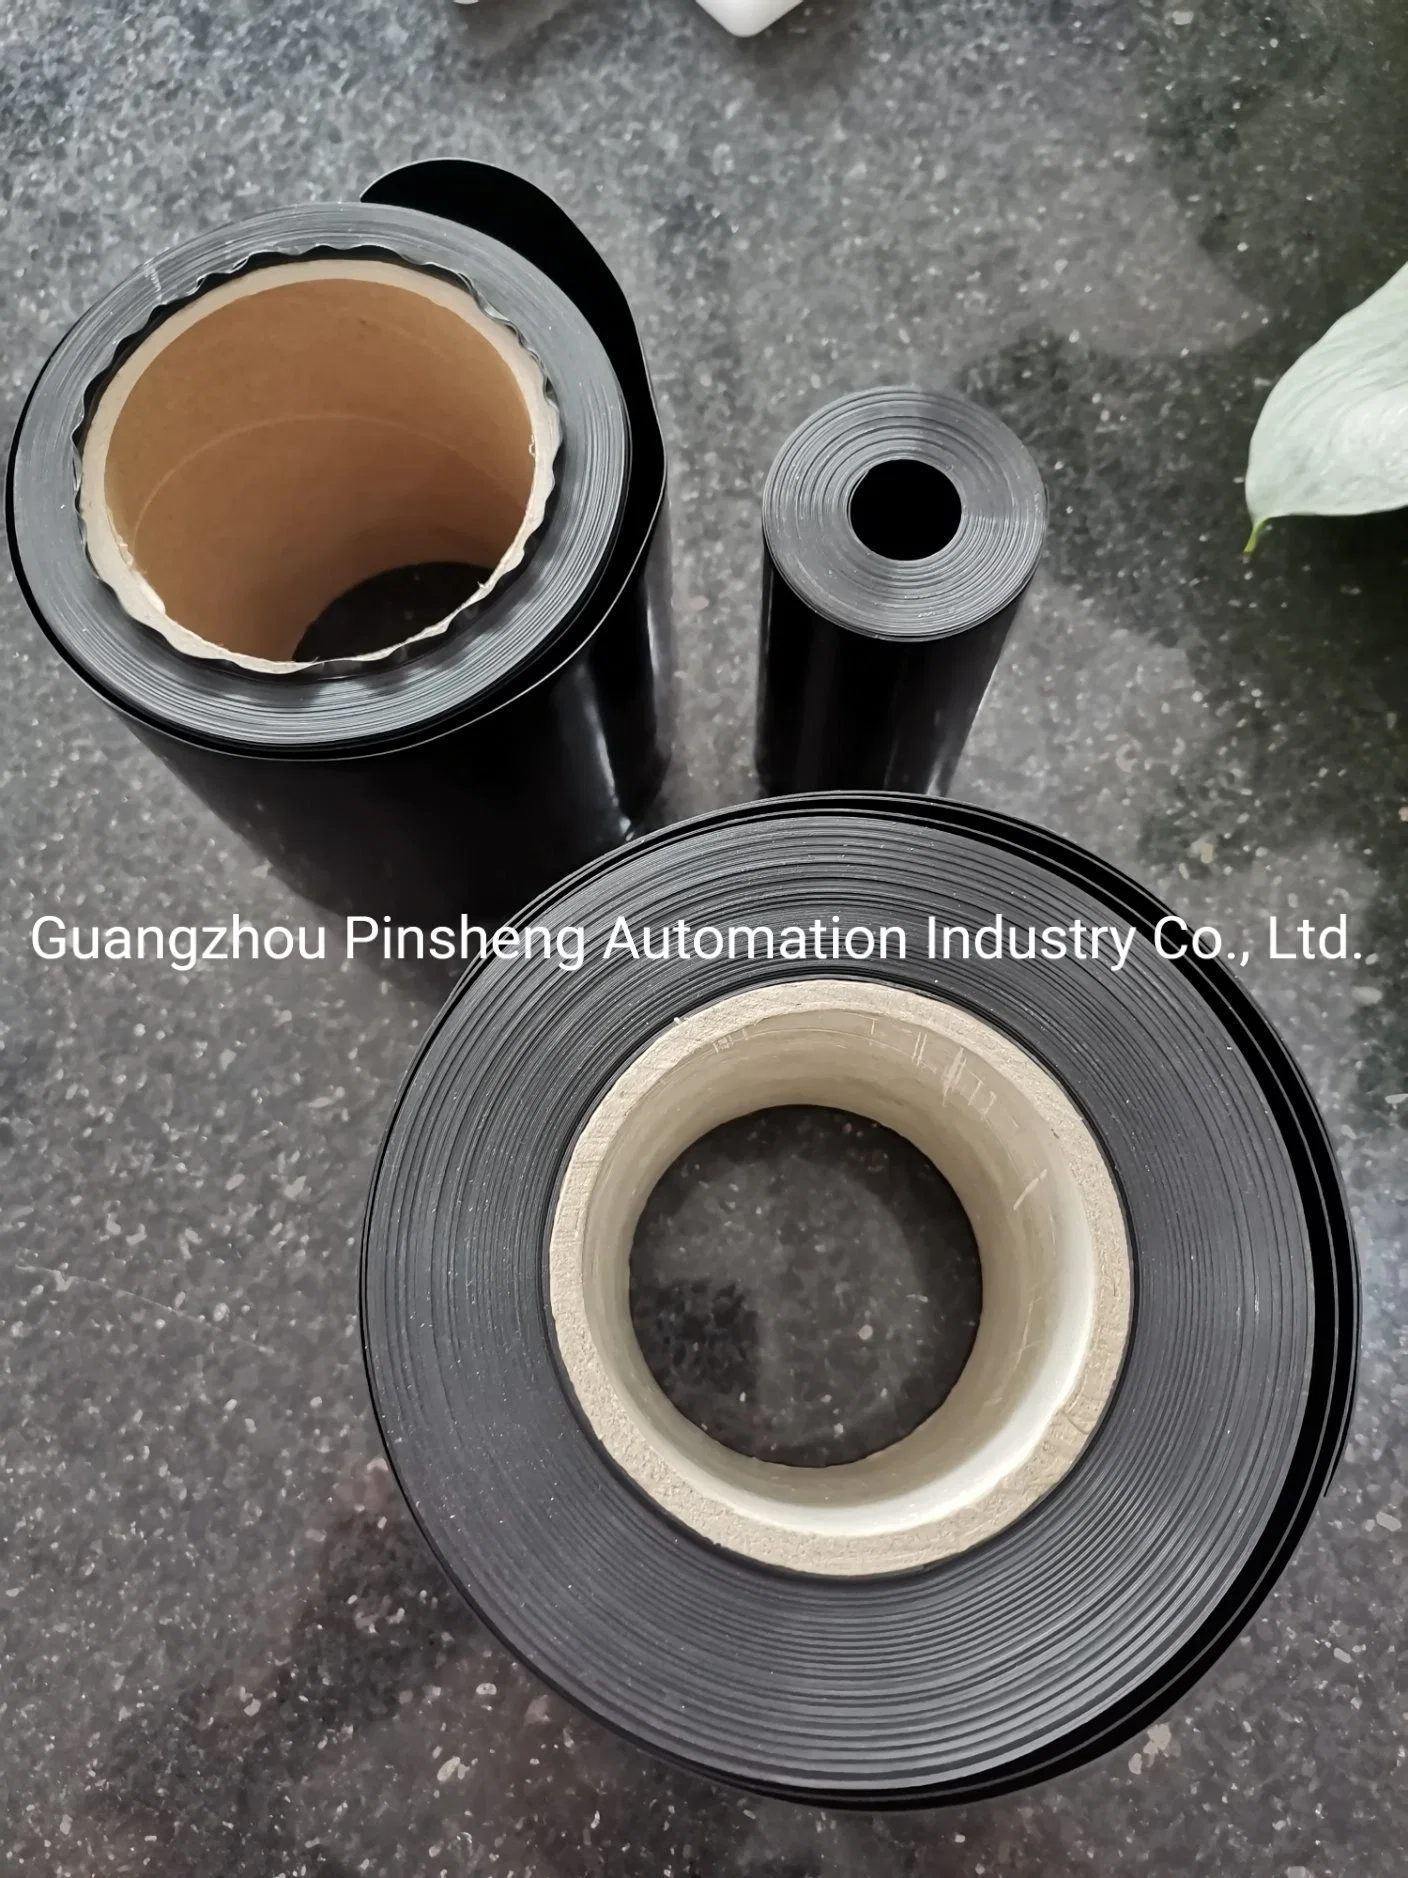 Widely Used in Foot Pads. Foot Stick. Upe Film of Insulation Material, Wear-Resistant Gasket, Wear-Resistant Panel, Packaging Material, etc